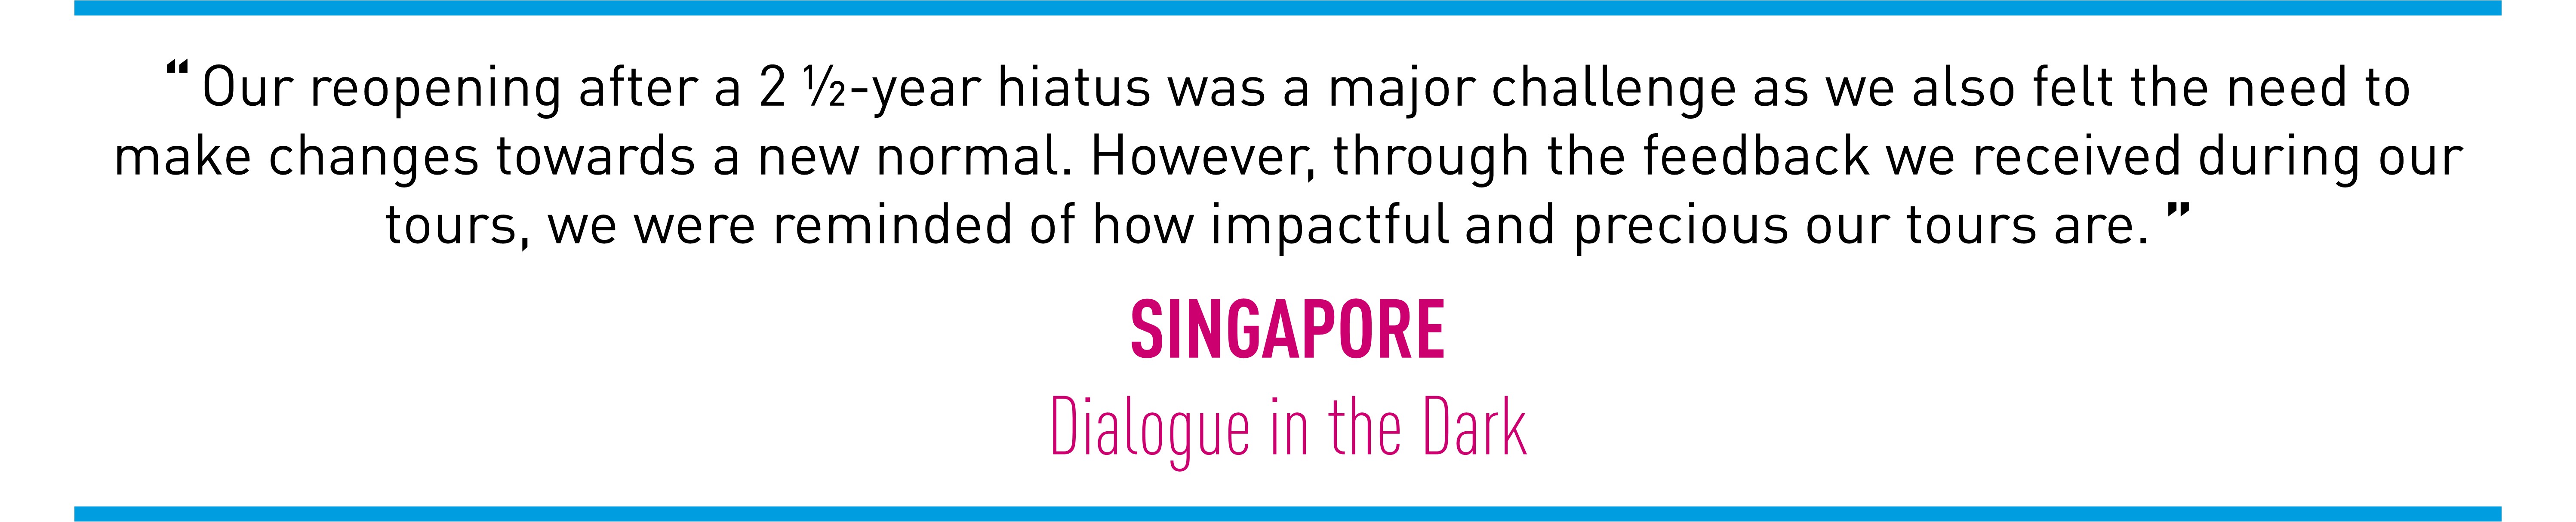 Our reopening after a 2 ½-year hiatus was a major challenge as we also felt the need to make changes towards a new normal. However, through the feedback we received during our tours, we were reminded of how impactful and precious our tours are. (SINGAPORE Dialogue in the Dark)